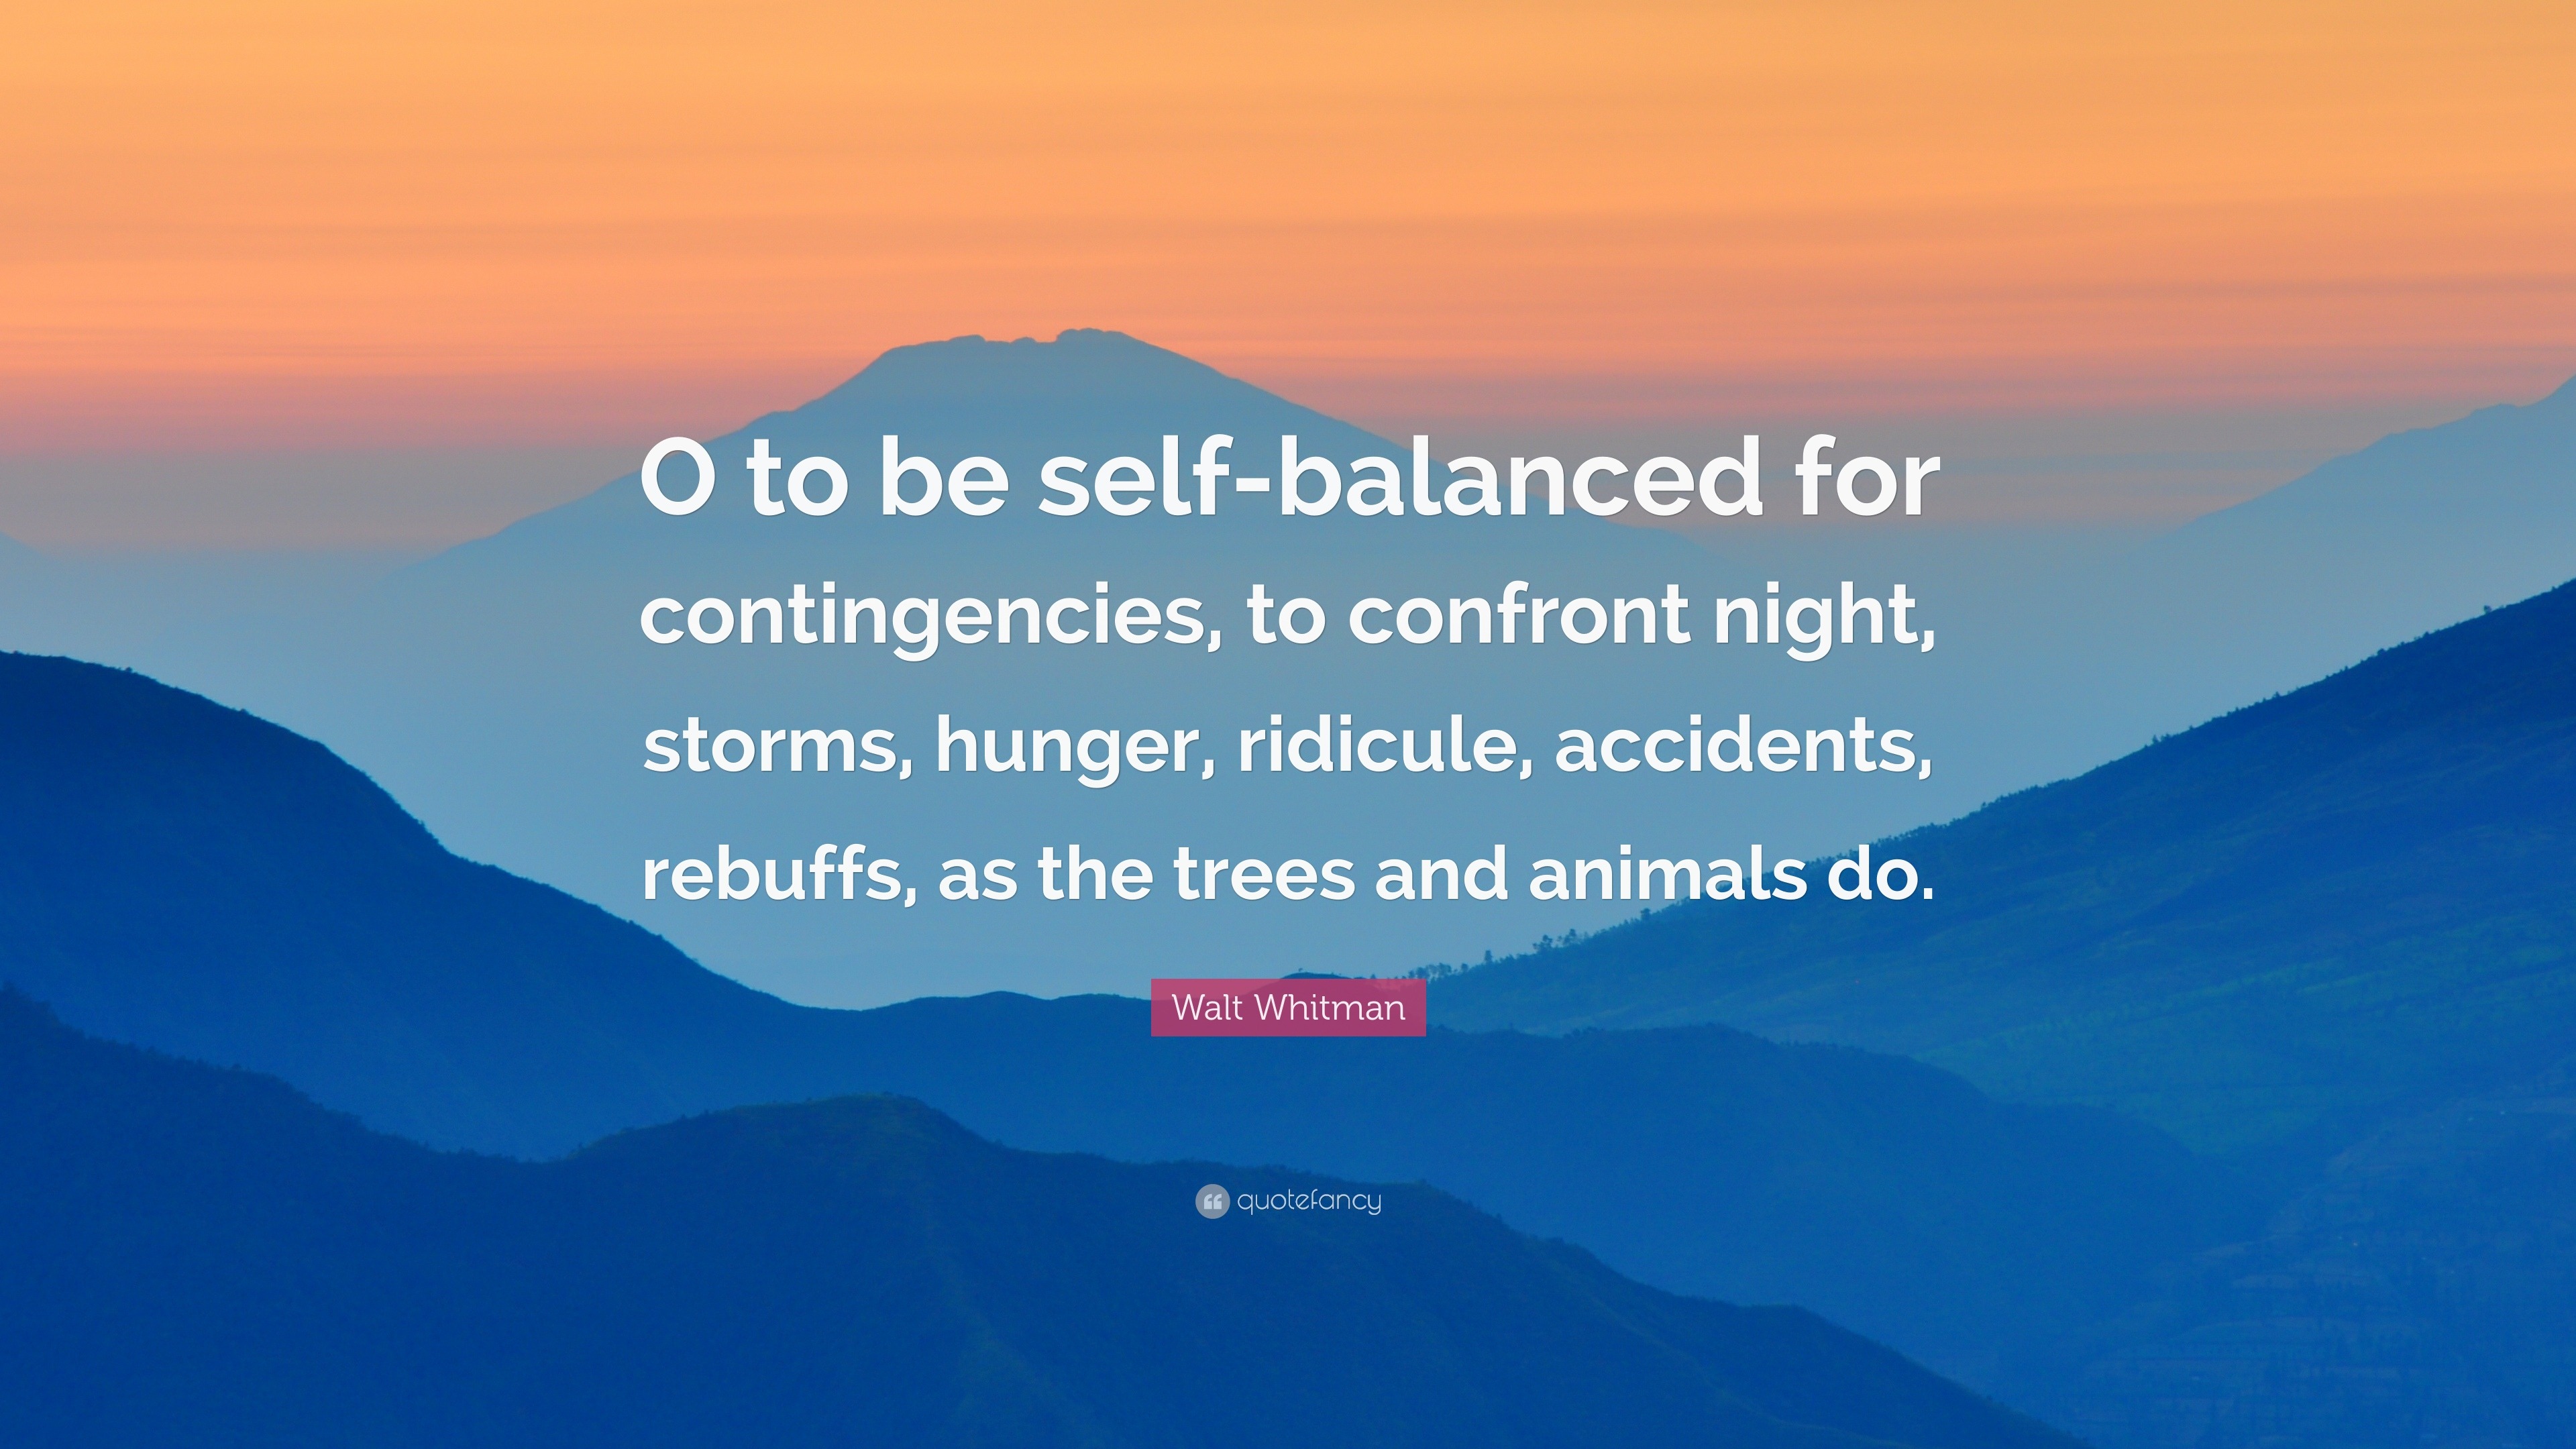 Walt Whitman Quote: “O to be self-balanced for contingencies, to confront  night, storms, hunger, ridicule, accidents, rebuffs, as the trees a...”